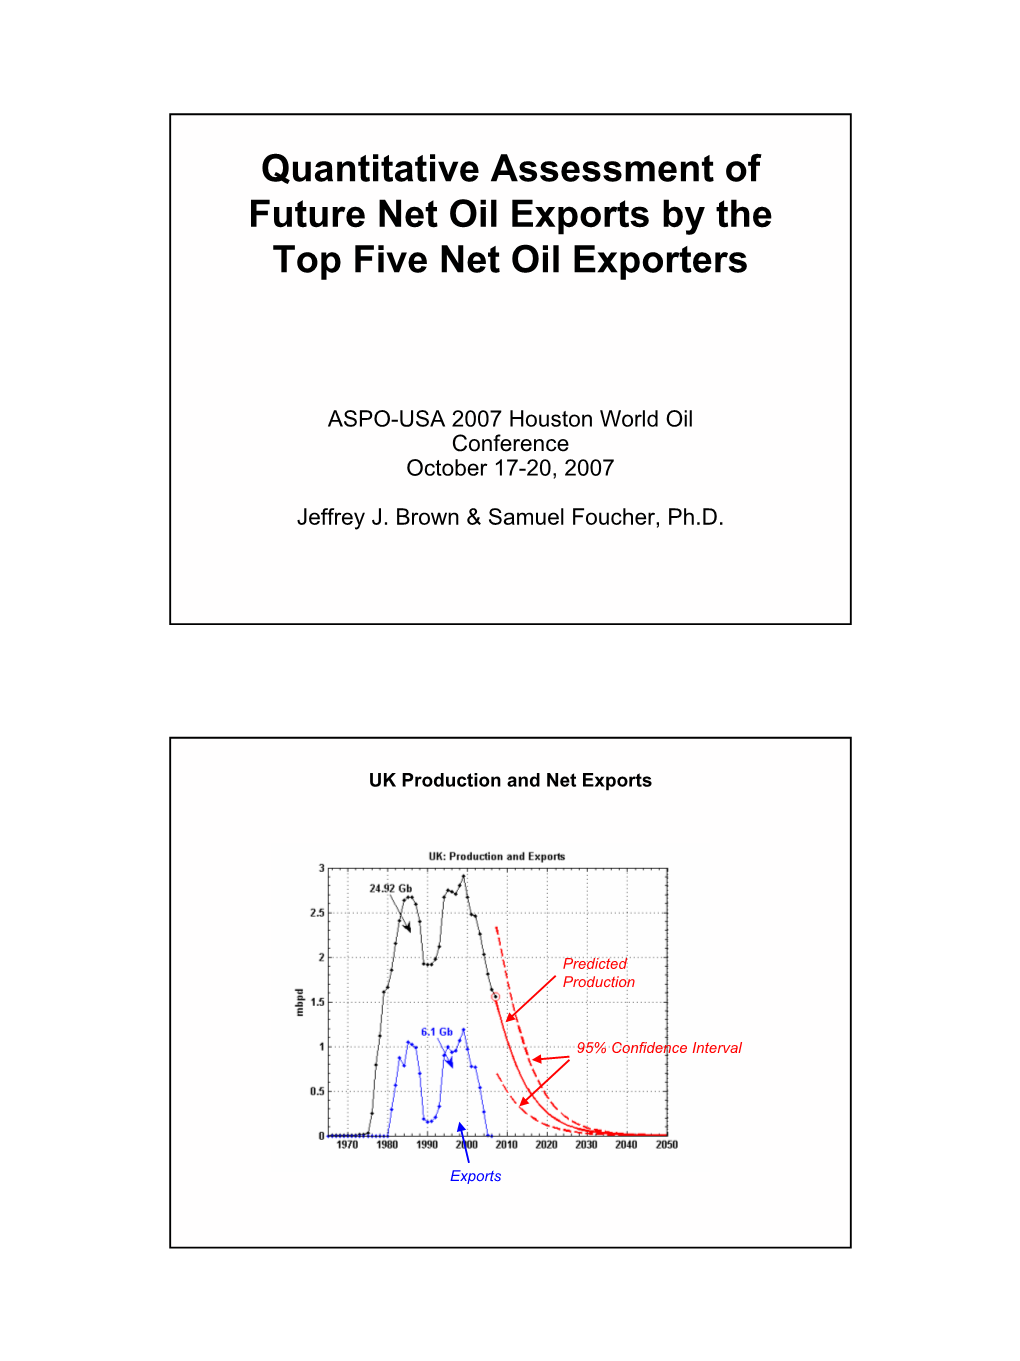 Quantitative Assessment of Future Net Oil Exports by the Top Five Net Oil Exporters